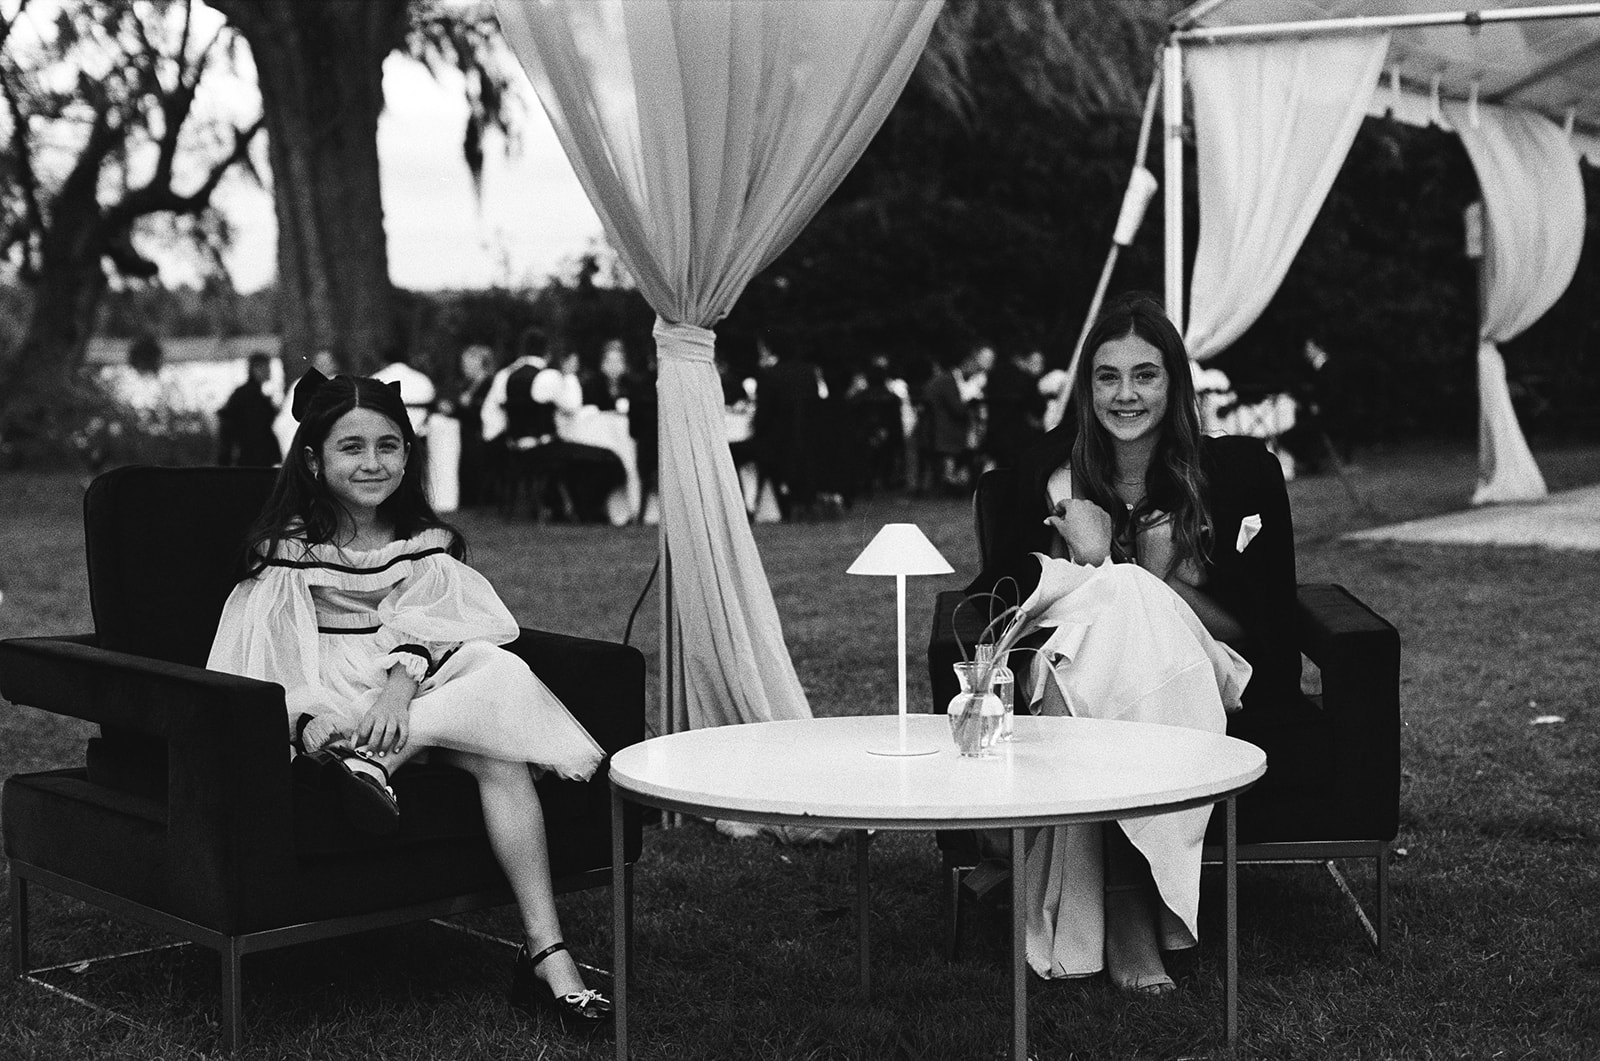 Black and white film photo of young wedding guests sitting at table